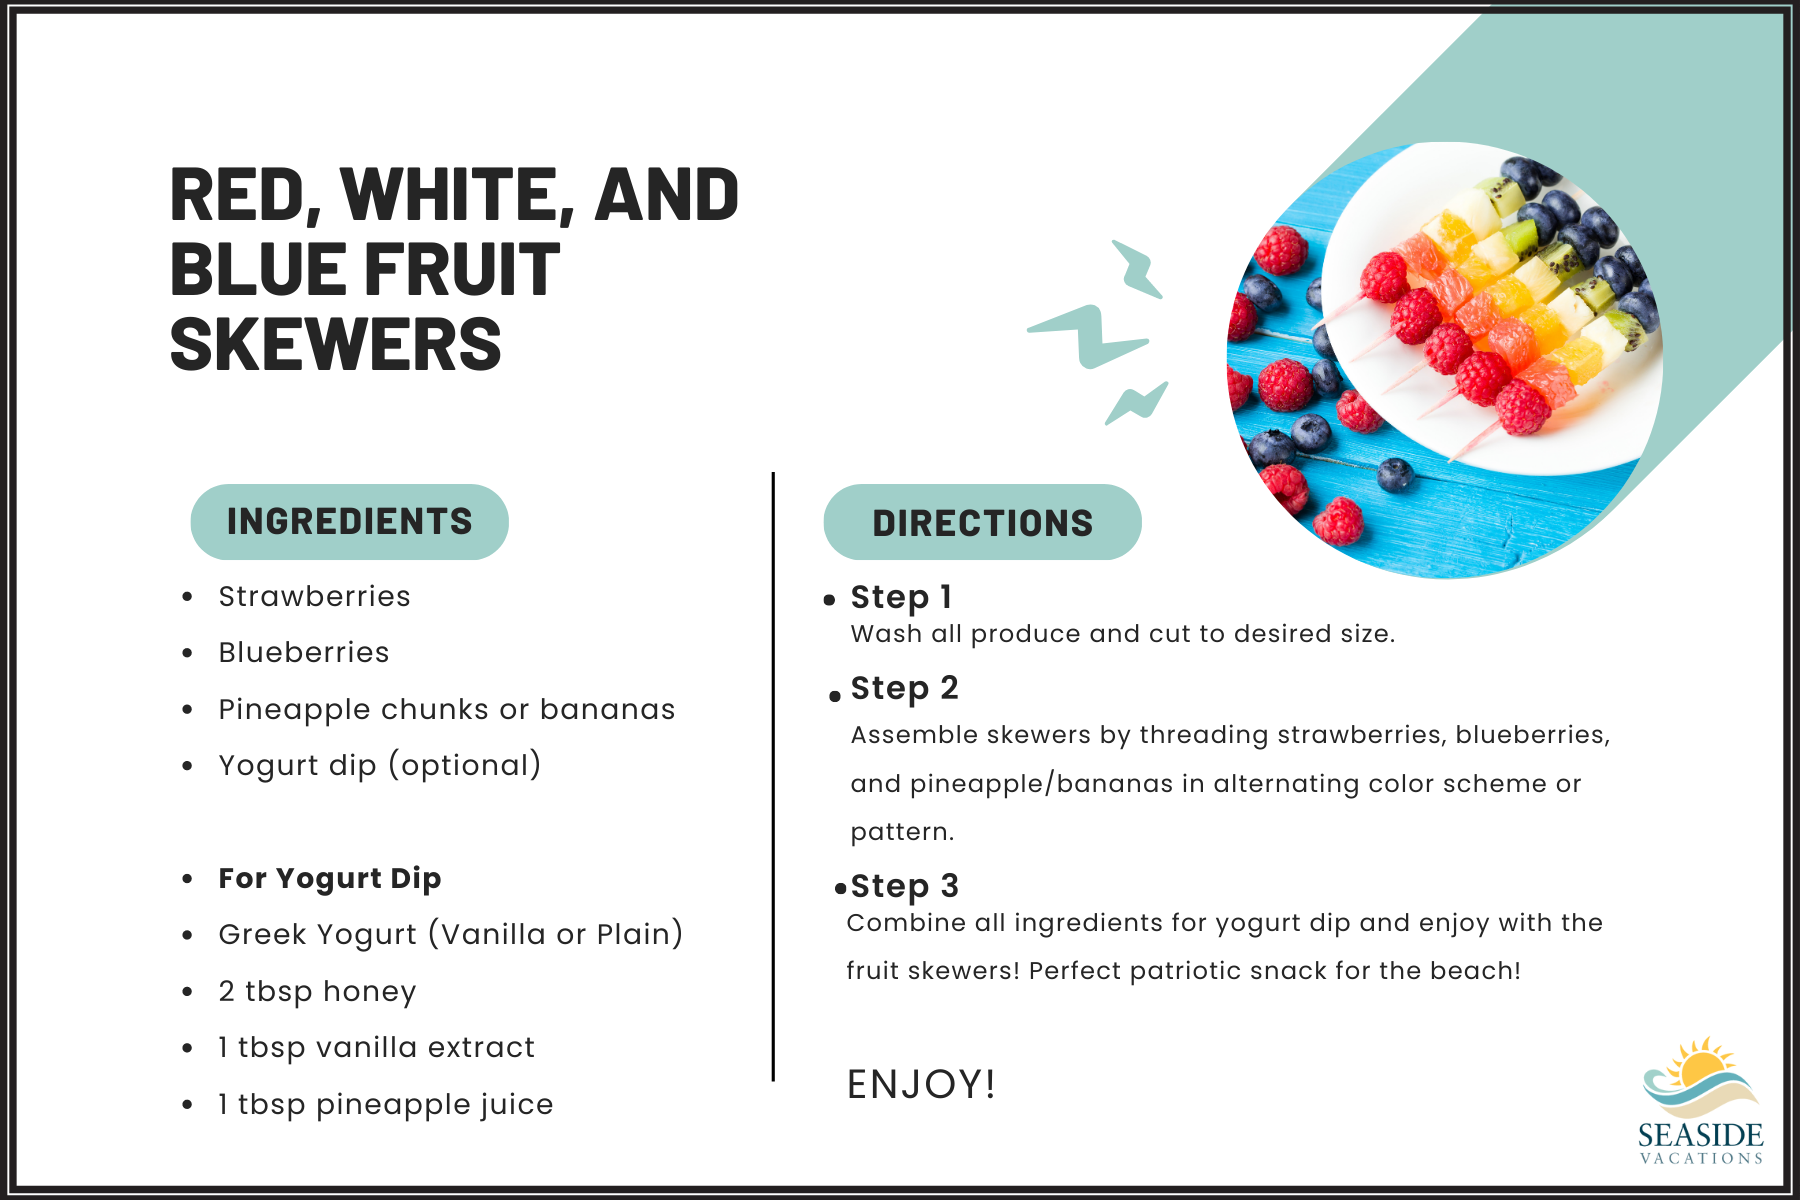 Red, White, and Blue Fruit Skewers Recipe Card